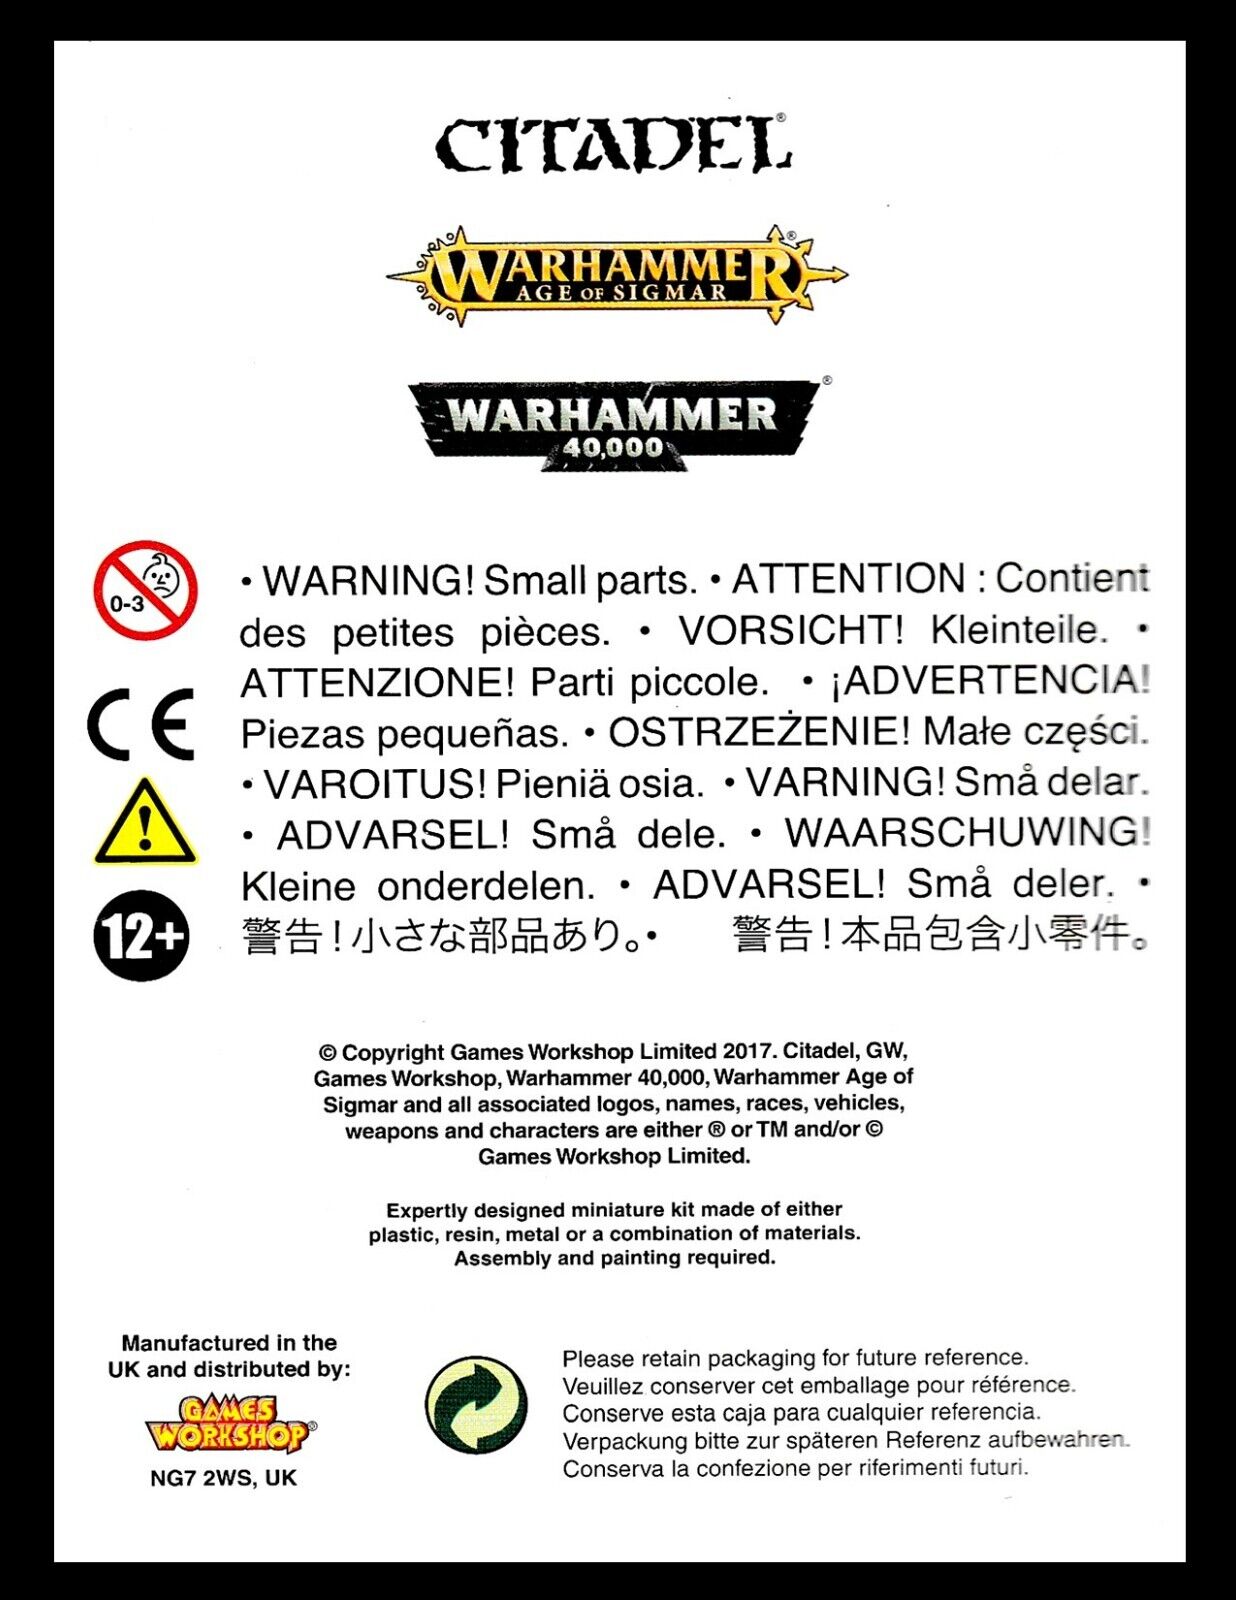 Honoured of the Chapter Space Marines Warhammer 40K NIB!                 WBGames